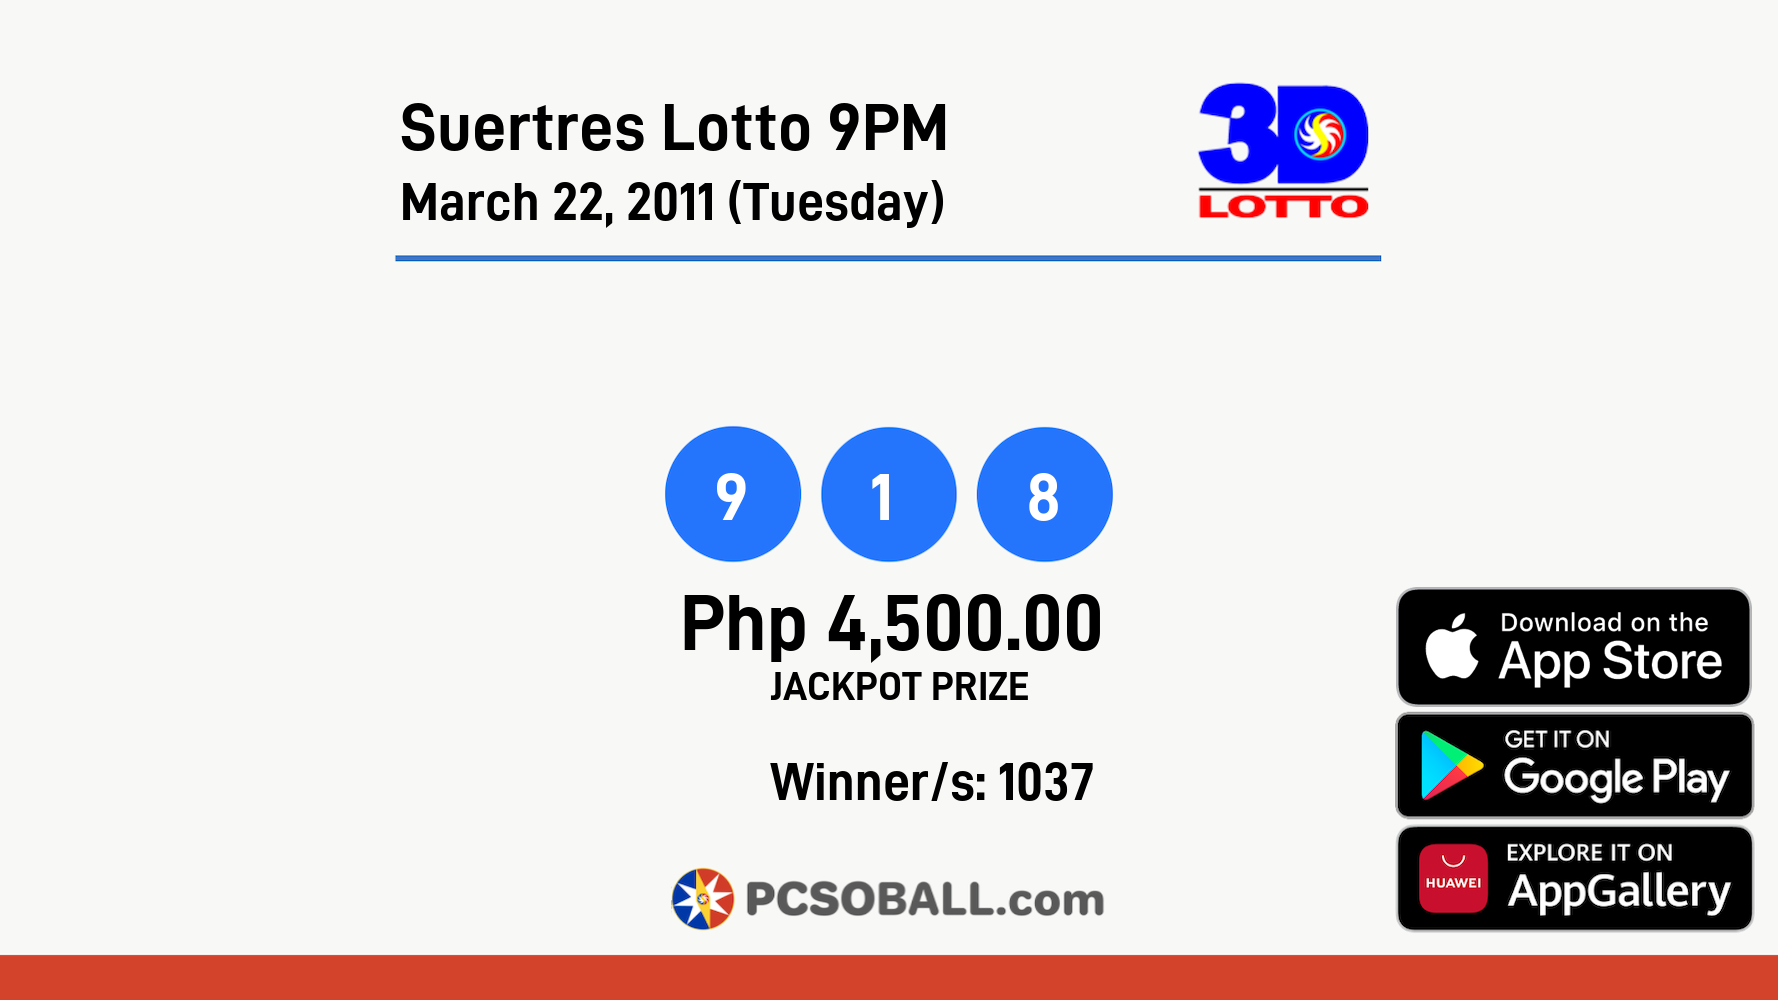 Suertres Lotto 9PM March 22, 2011 (Tuesday) Result